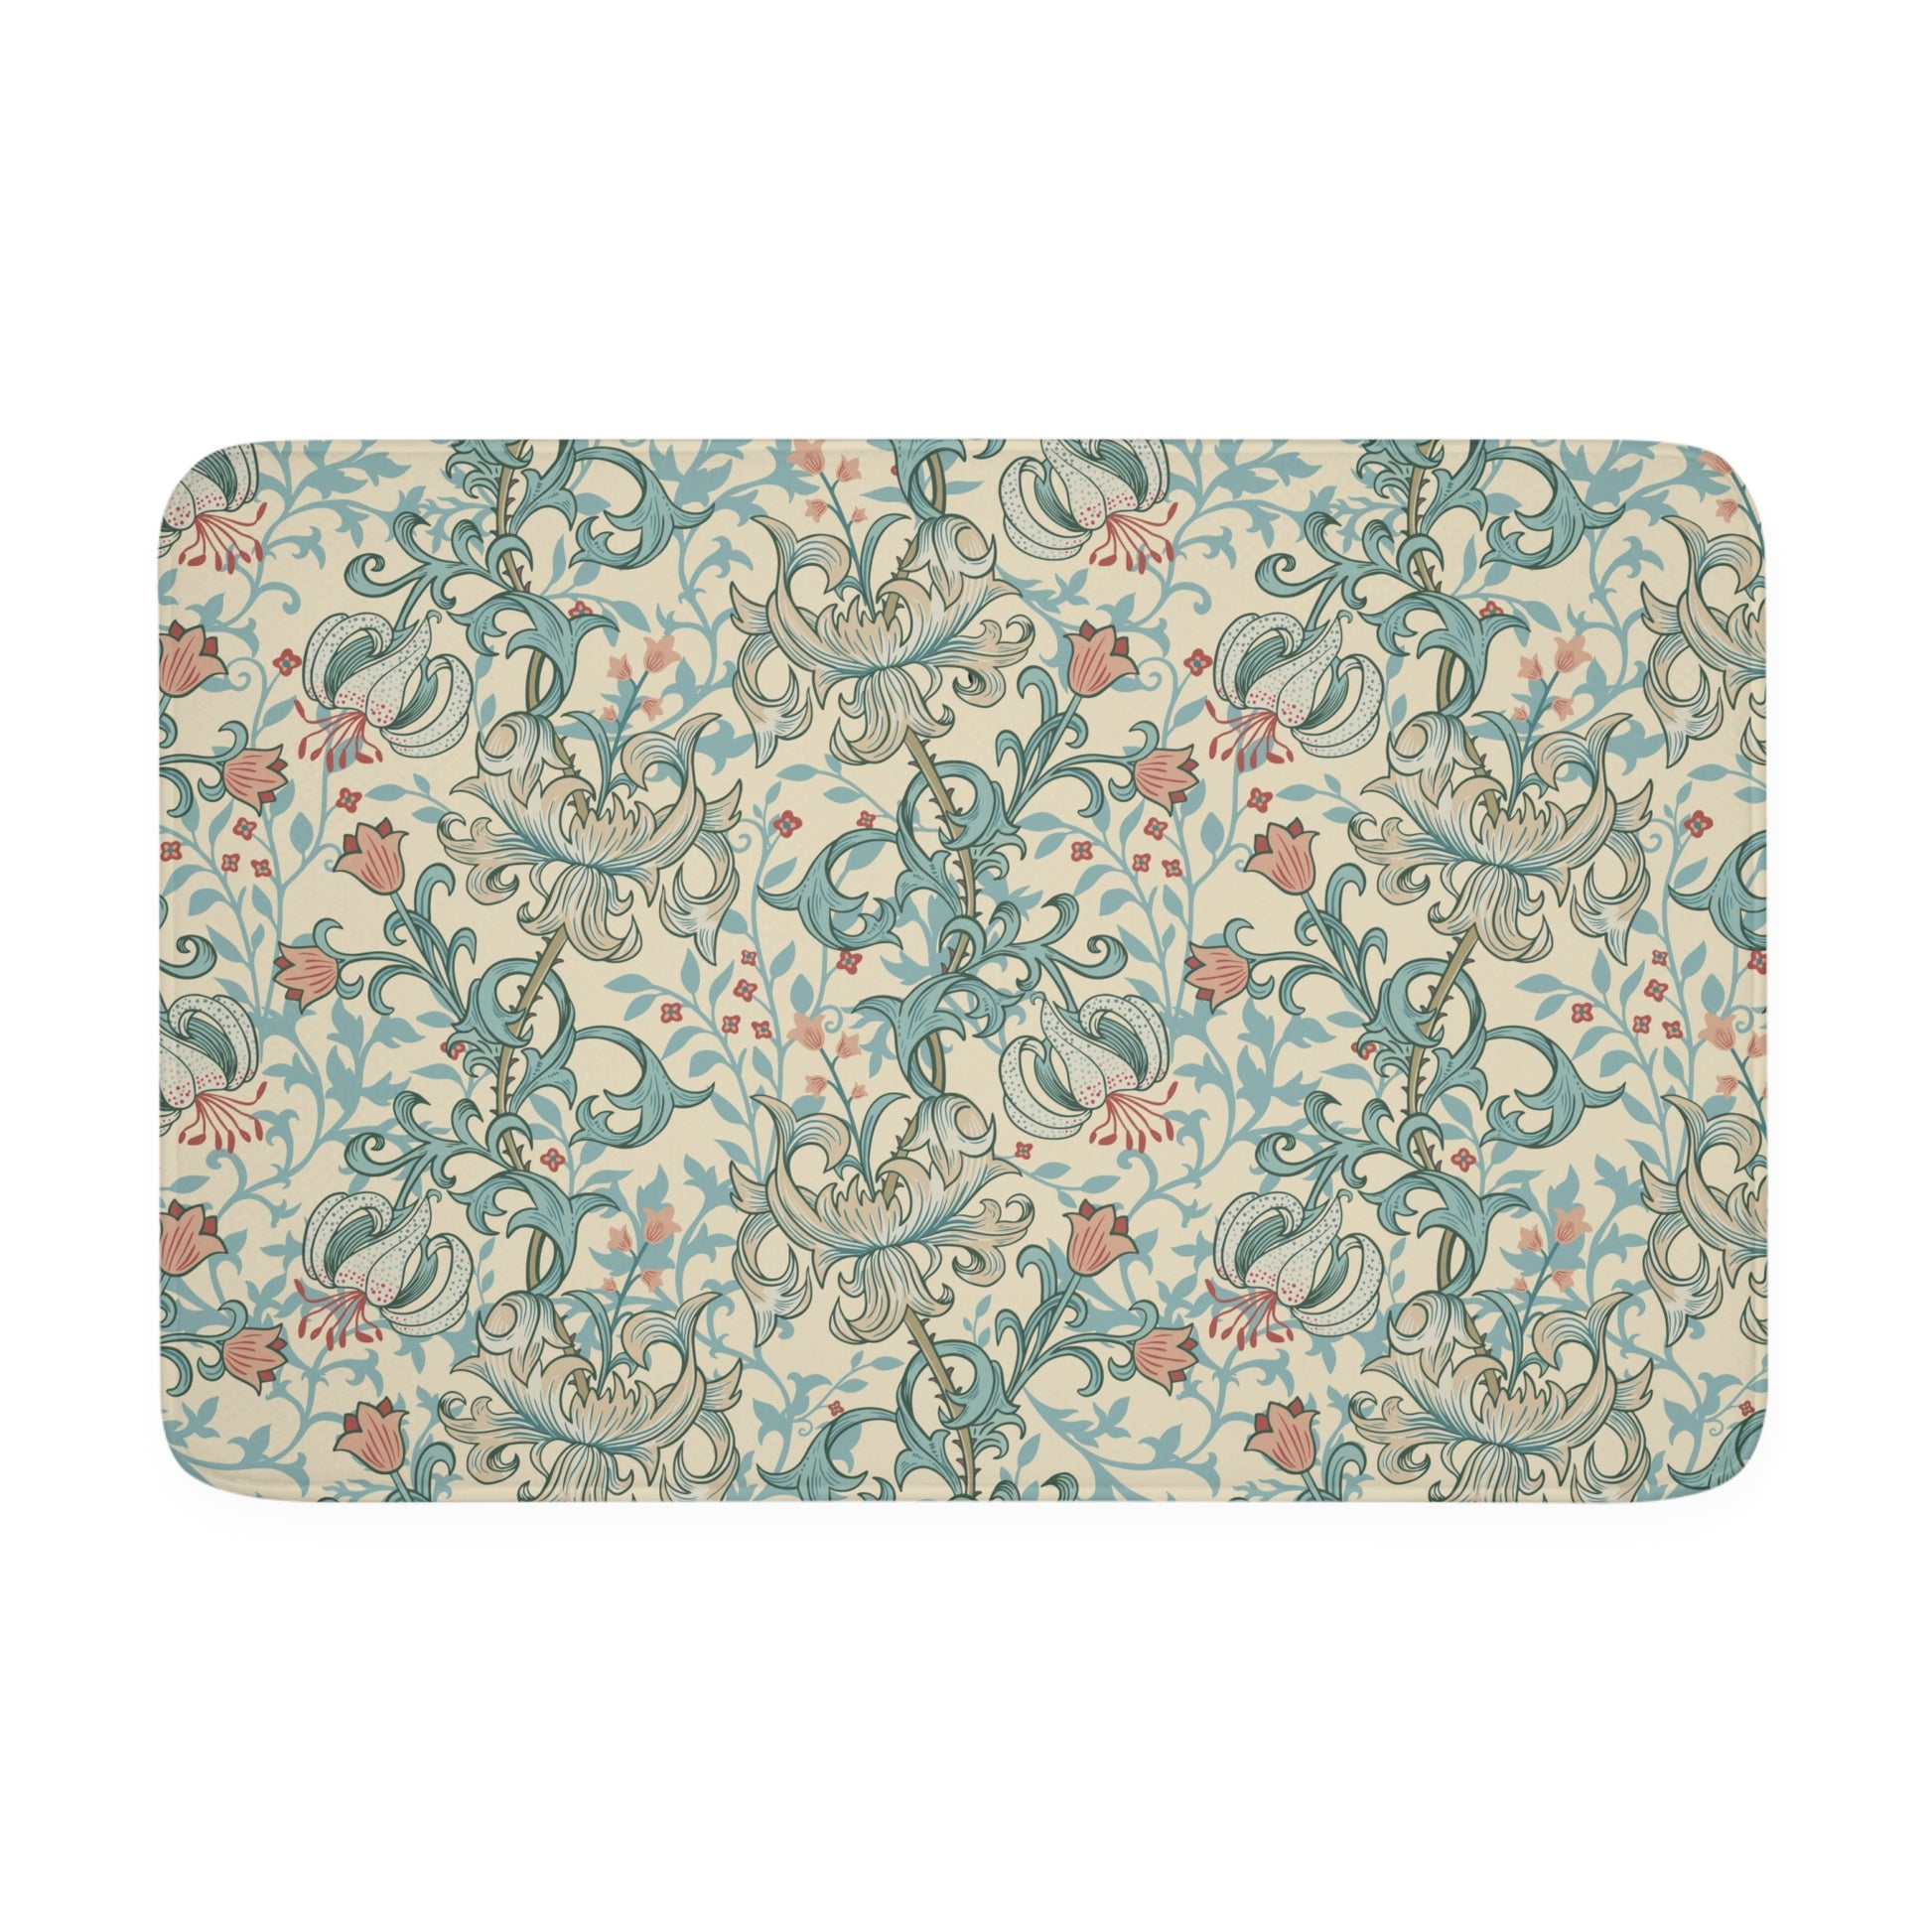 william-morris-co-memory-foam-bath-mat-golden-lily-collection-mineral-3